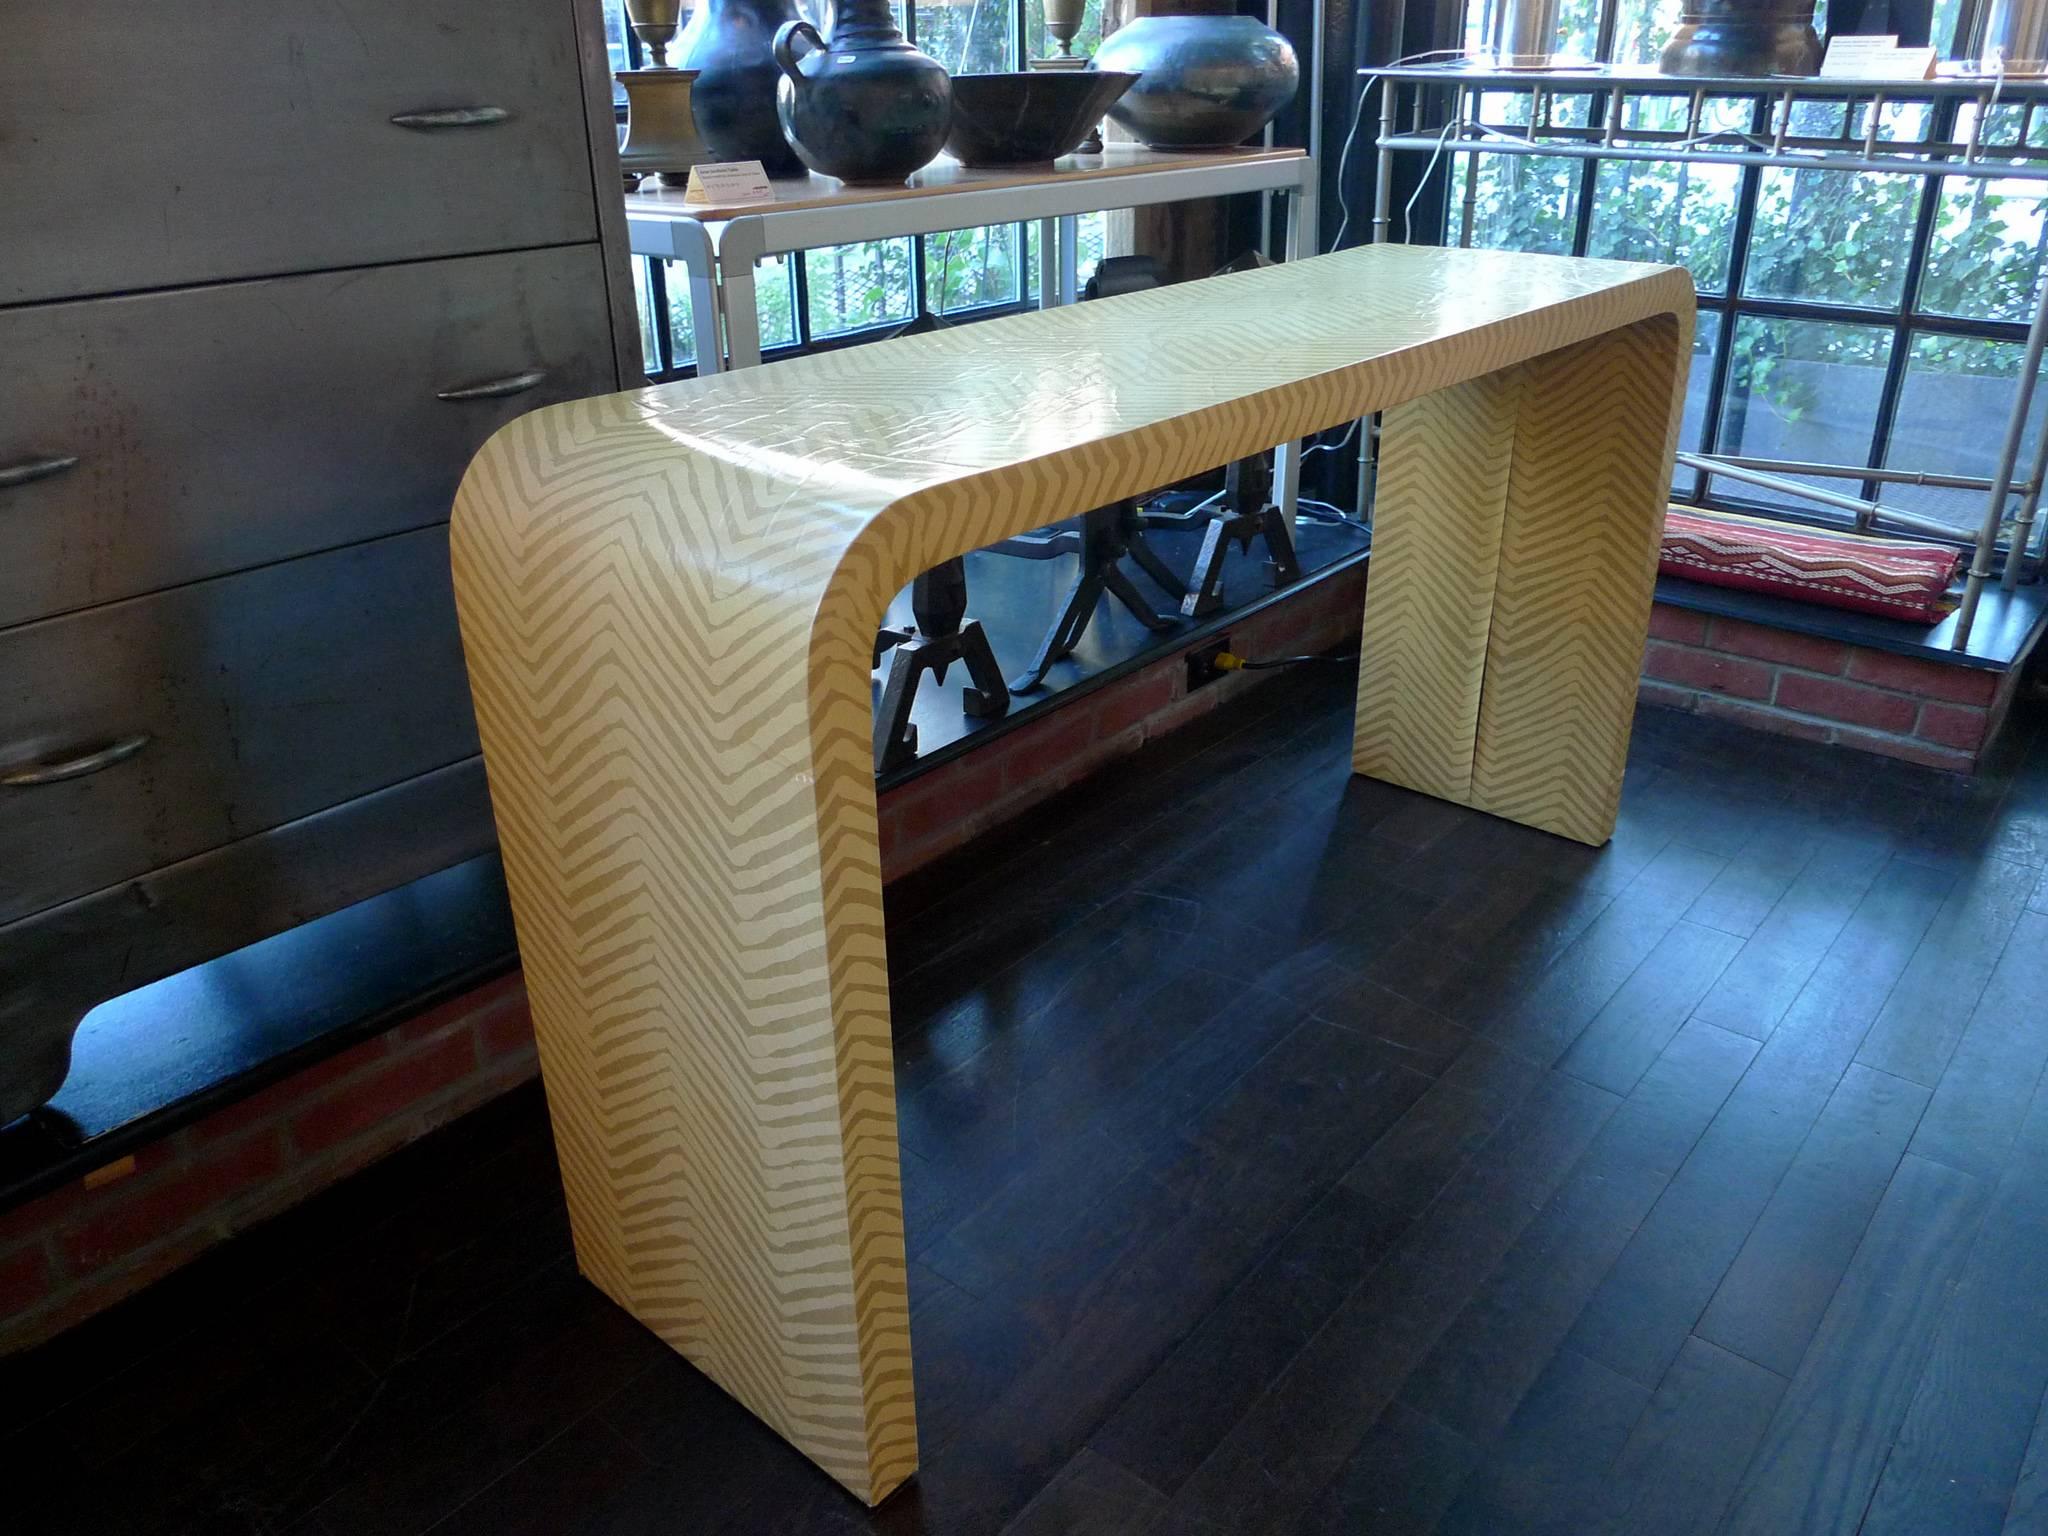 Similar to the designs of Karl Springer, this console table combines a Minimalist shape with visually rich texture. The curved frame measures approximately two inches and is covered in a grasscloth-like material set in yellow stripes. It's a simple